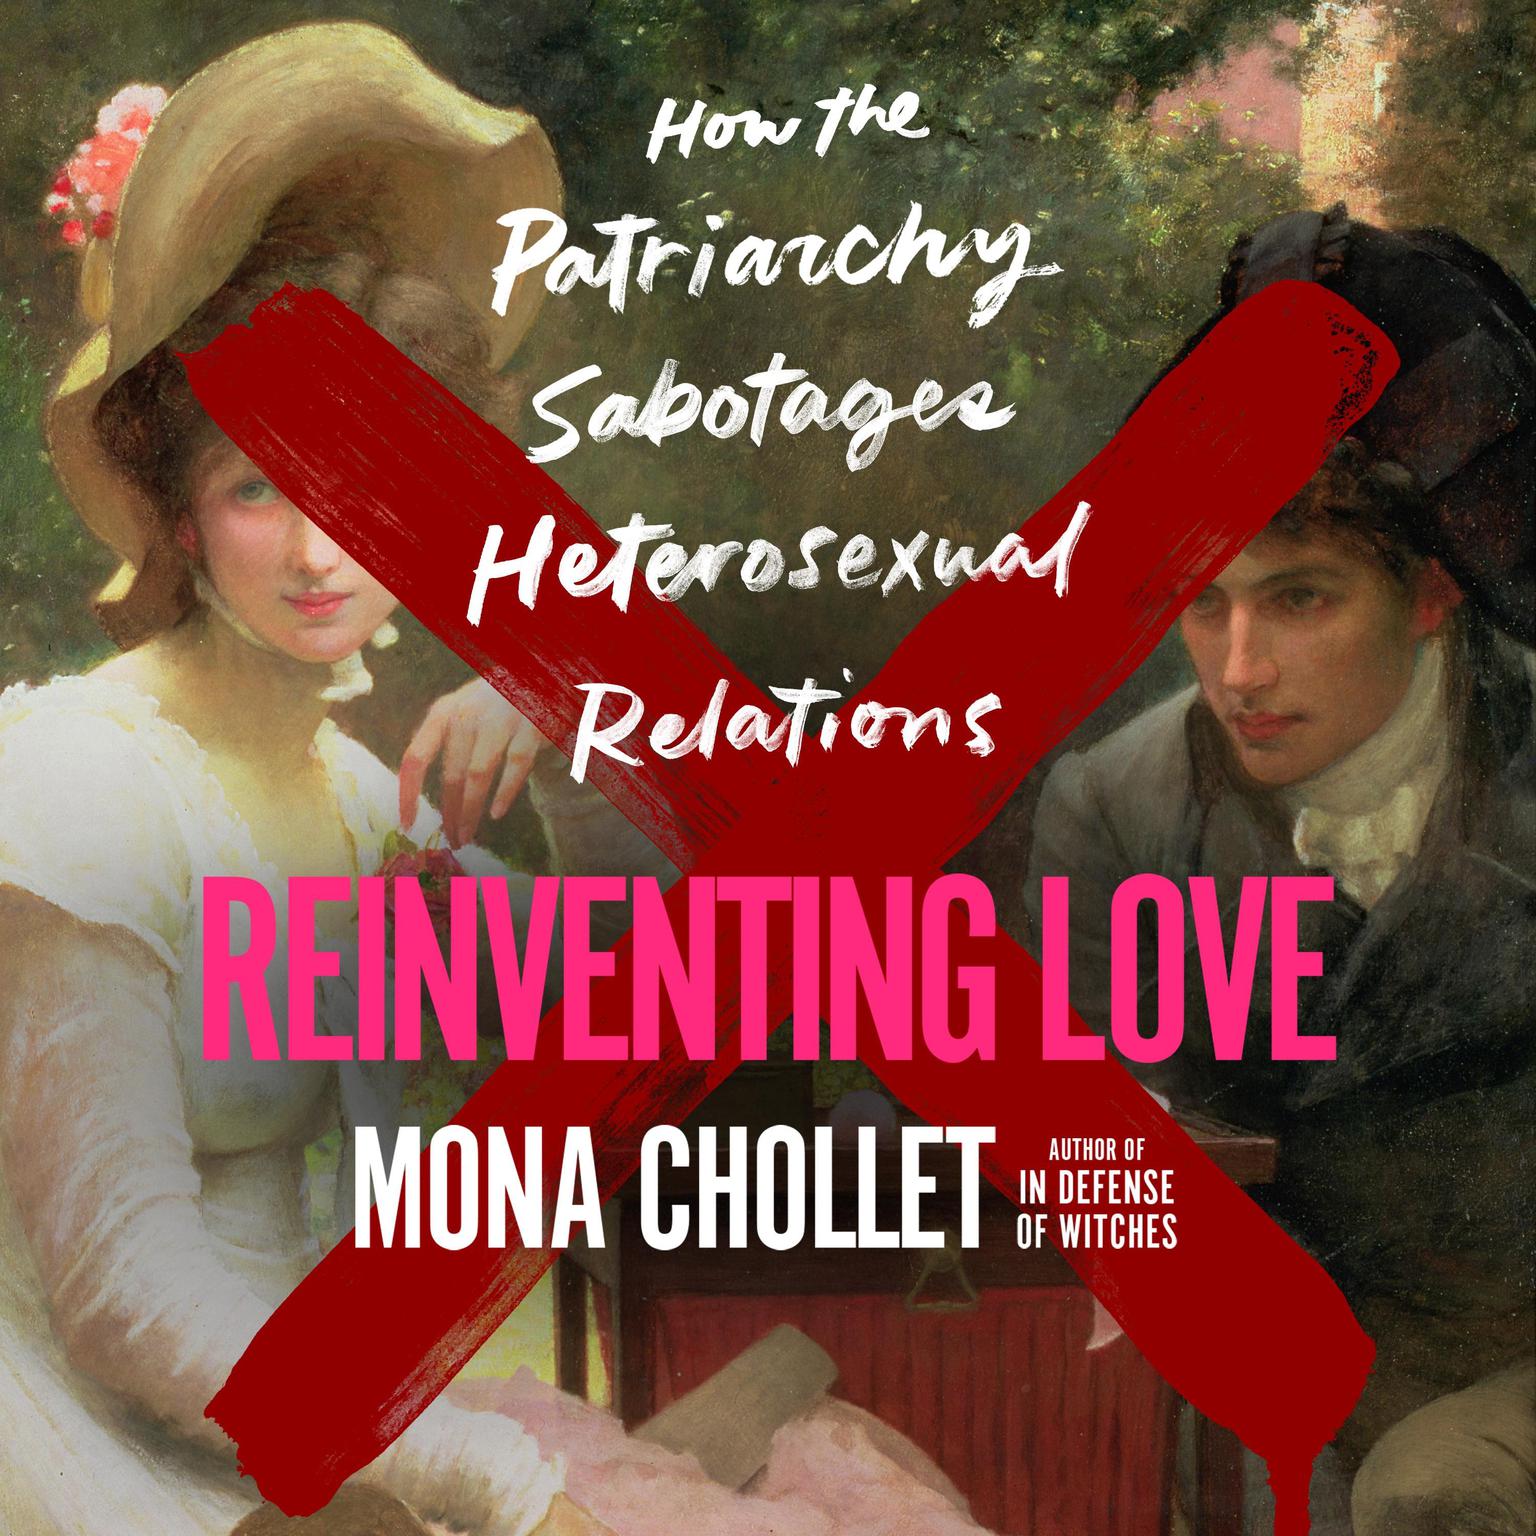 Reinventing Love: How the Patriarchy Sabotages Heterosexual Relations Audiobook, by Mona Chollet